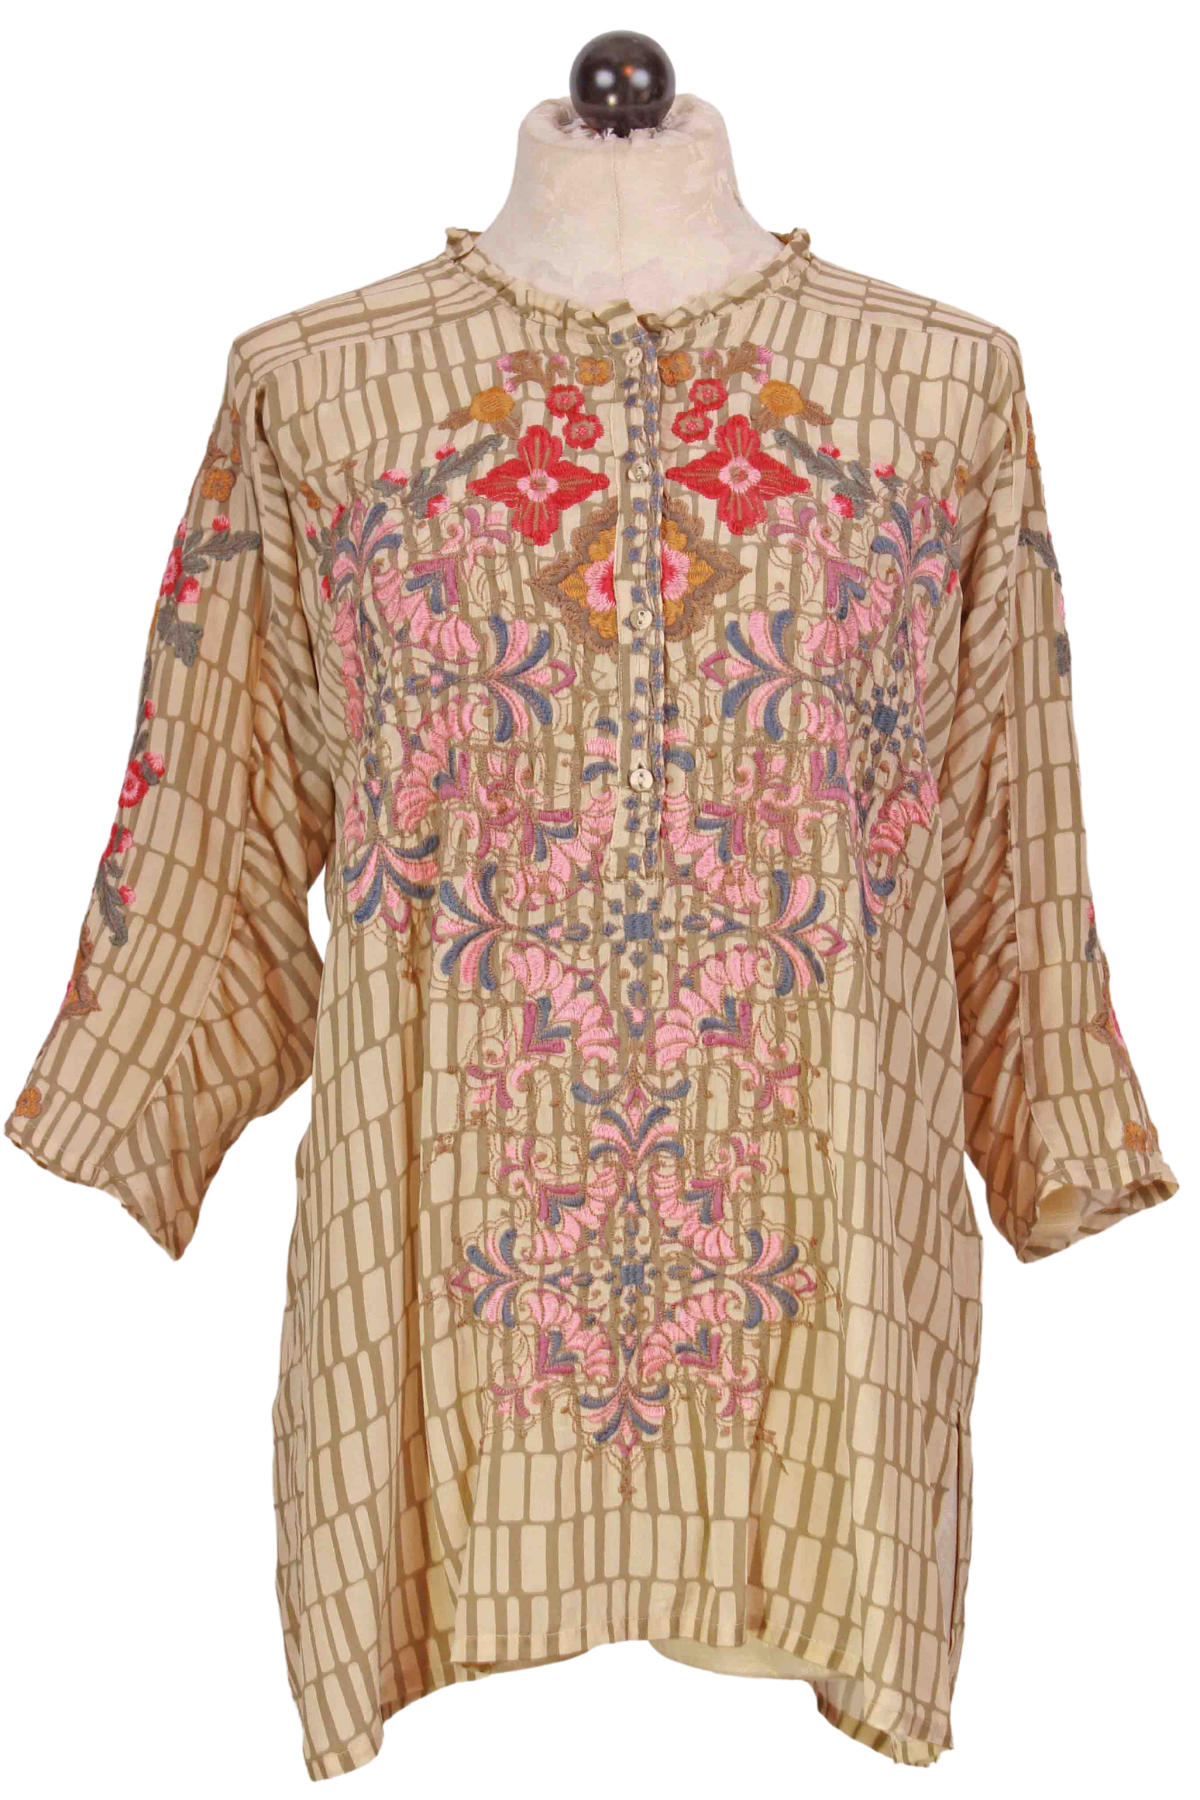 Multicolored Grid Patterned Irma Blouse with Embroidery by Johnny Was